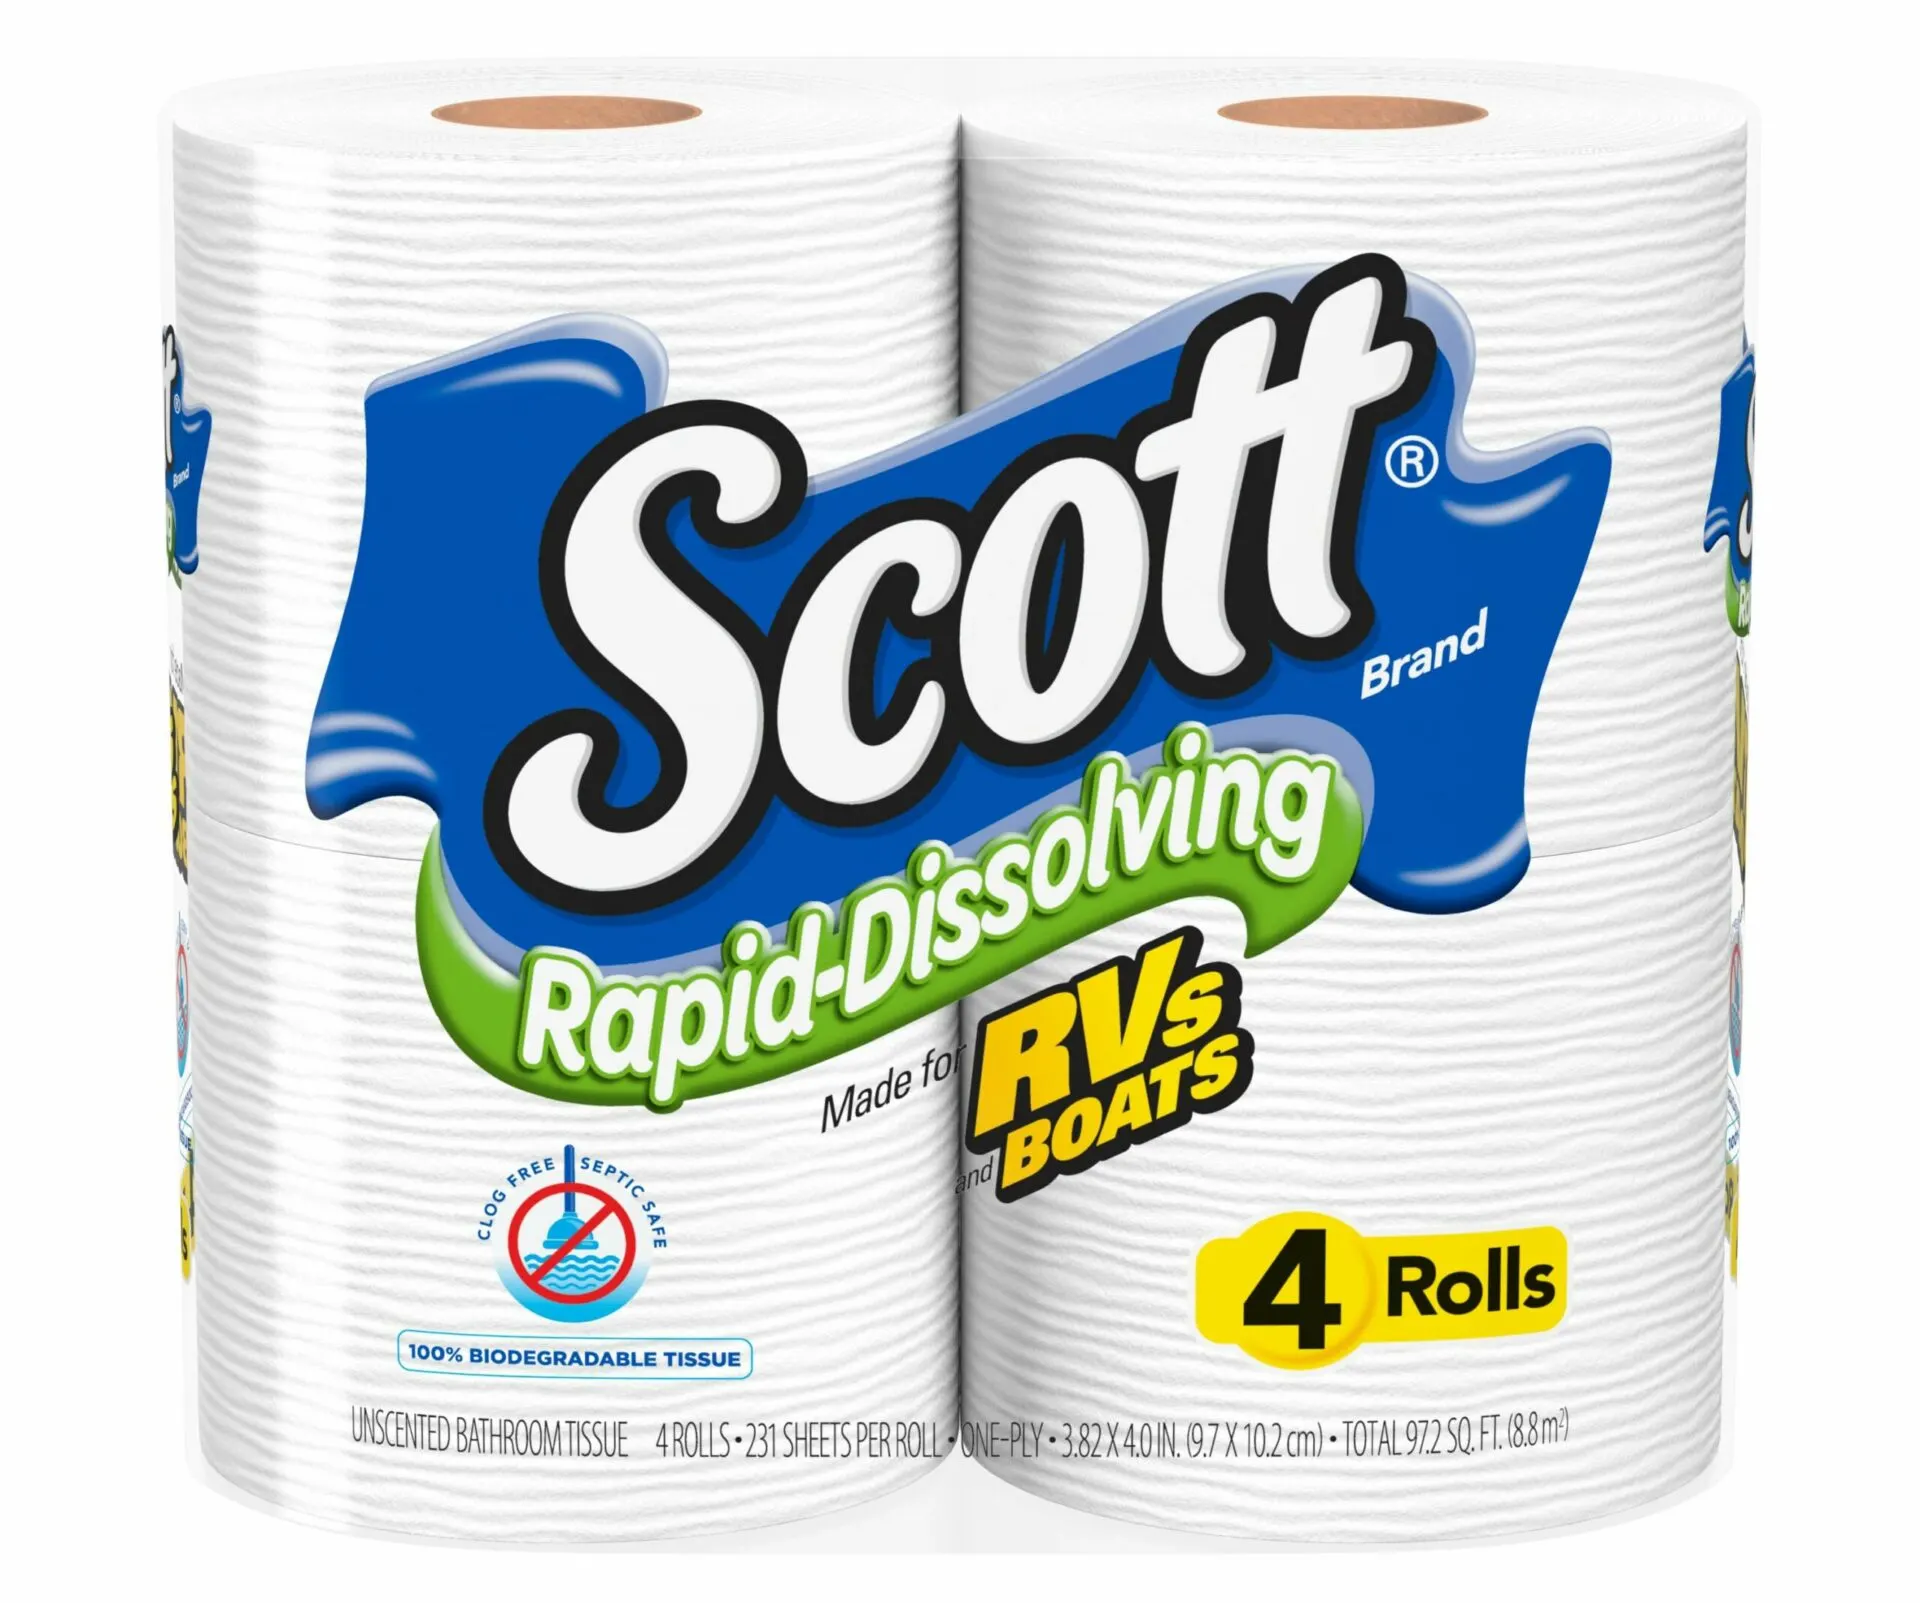 Toilet paper specifically advertised as being "RV-safe"